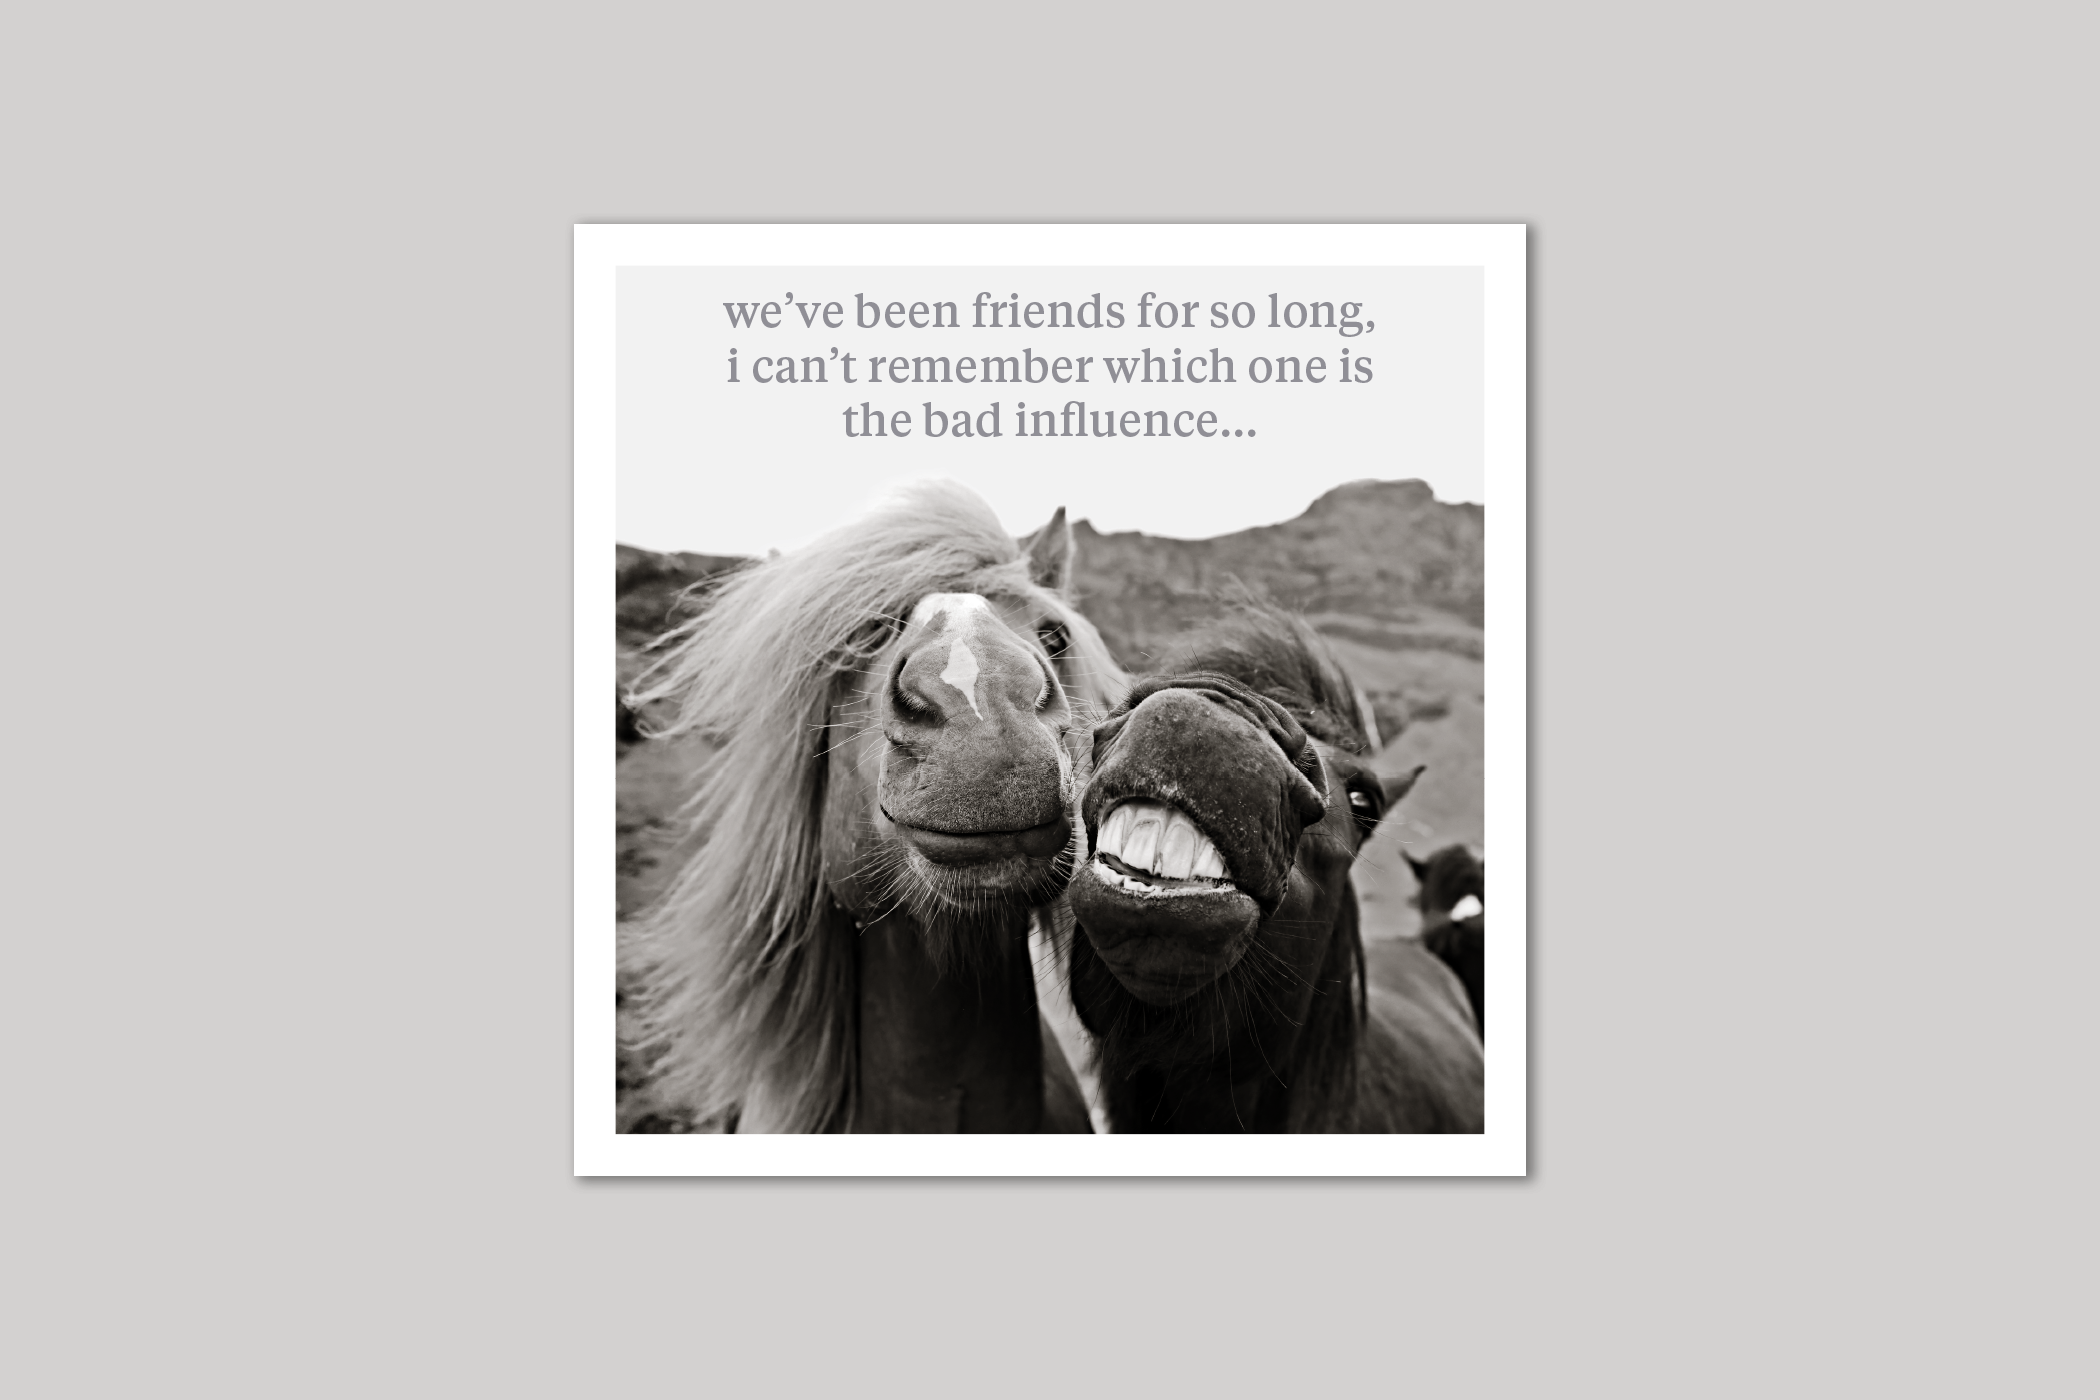 Bad Influence quirky animal portrait from Curious World range of greeting cards by Icon.